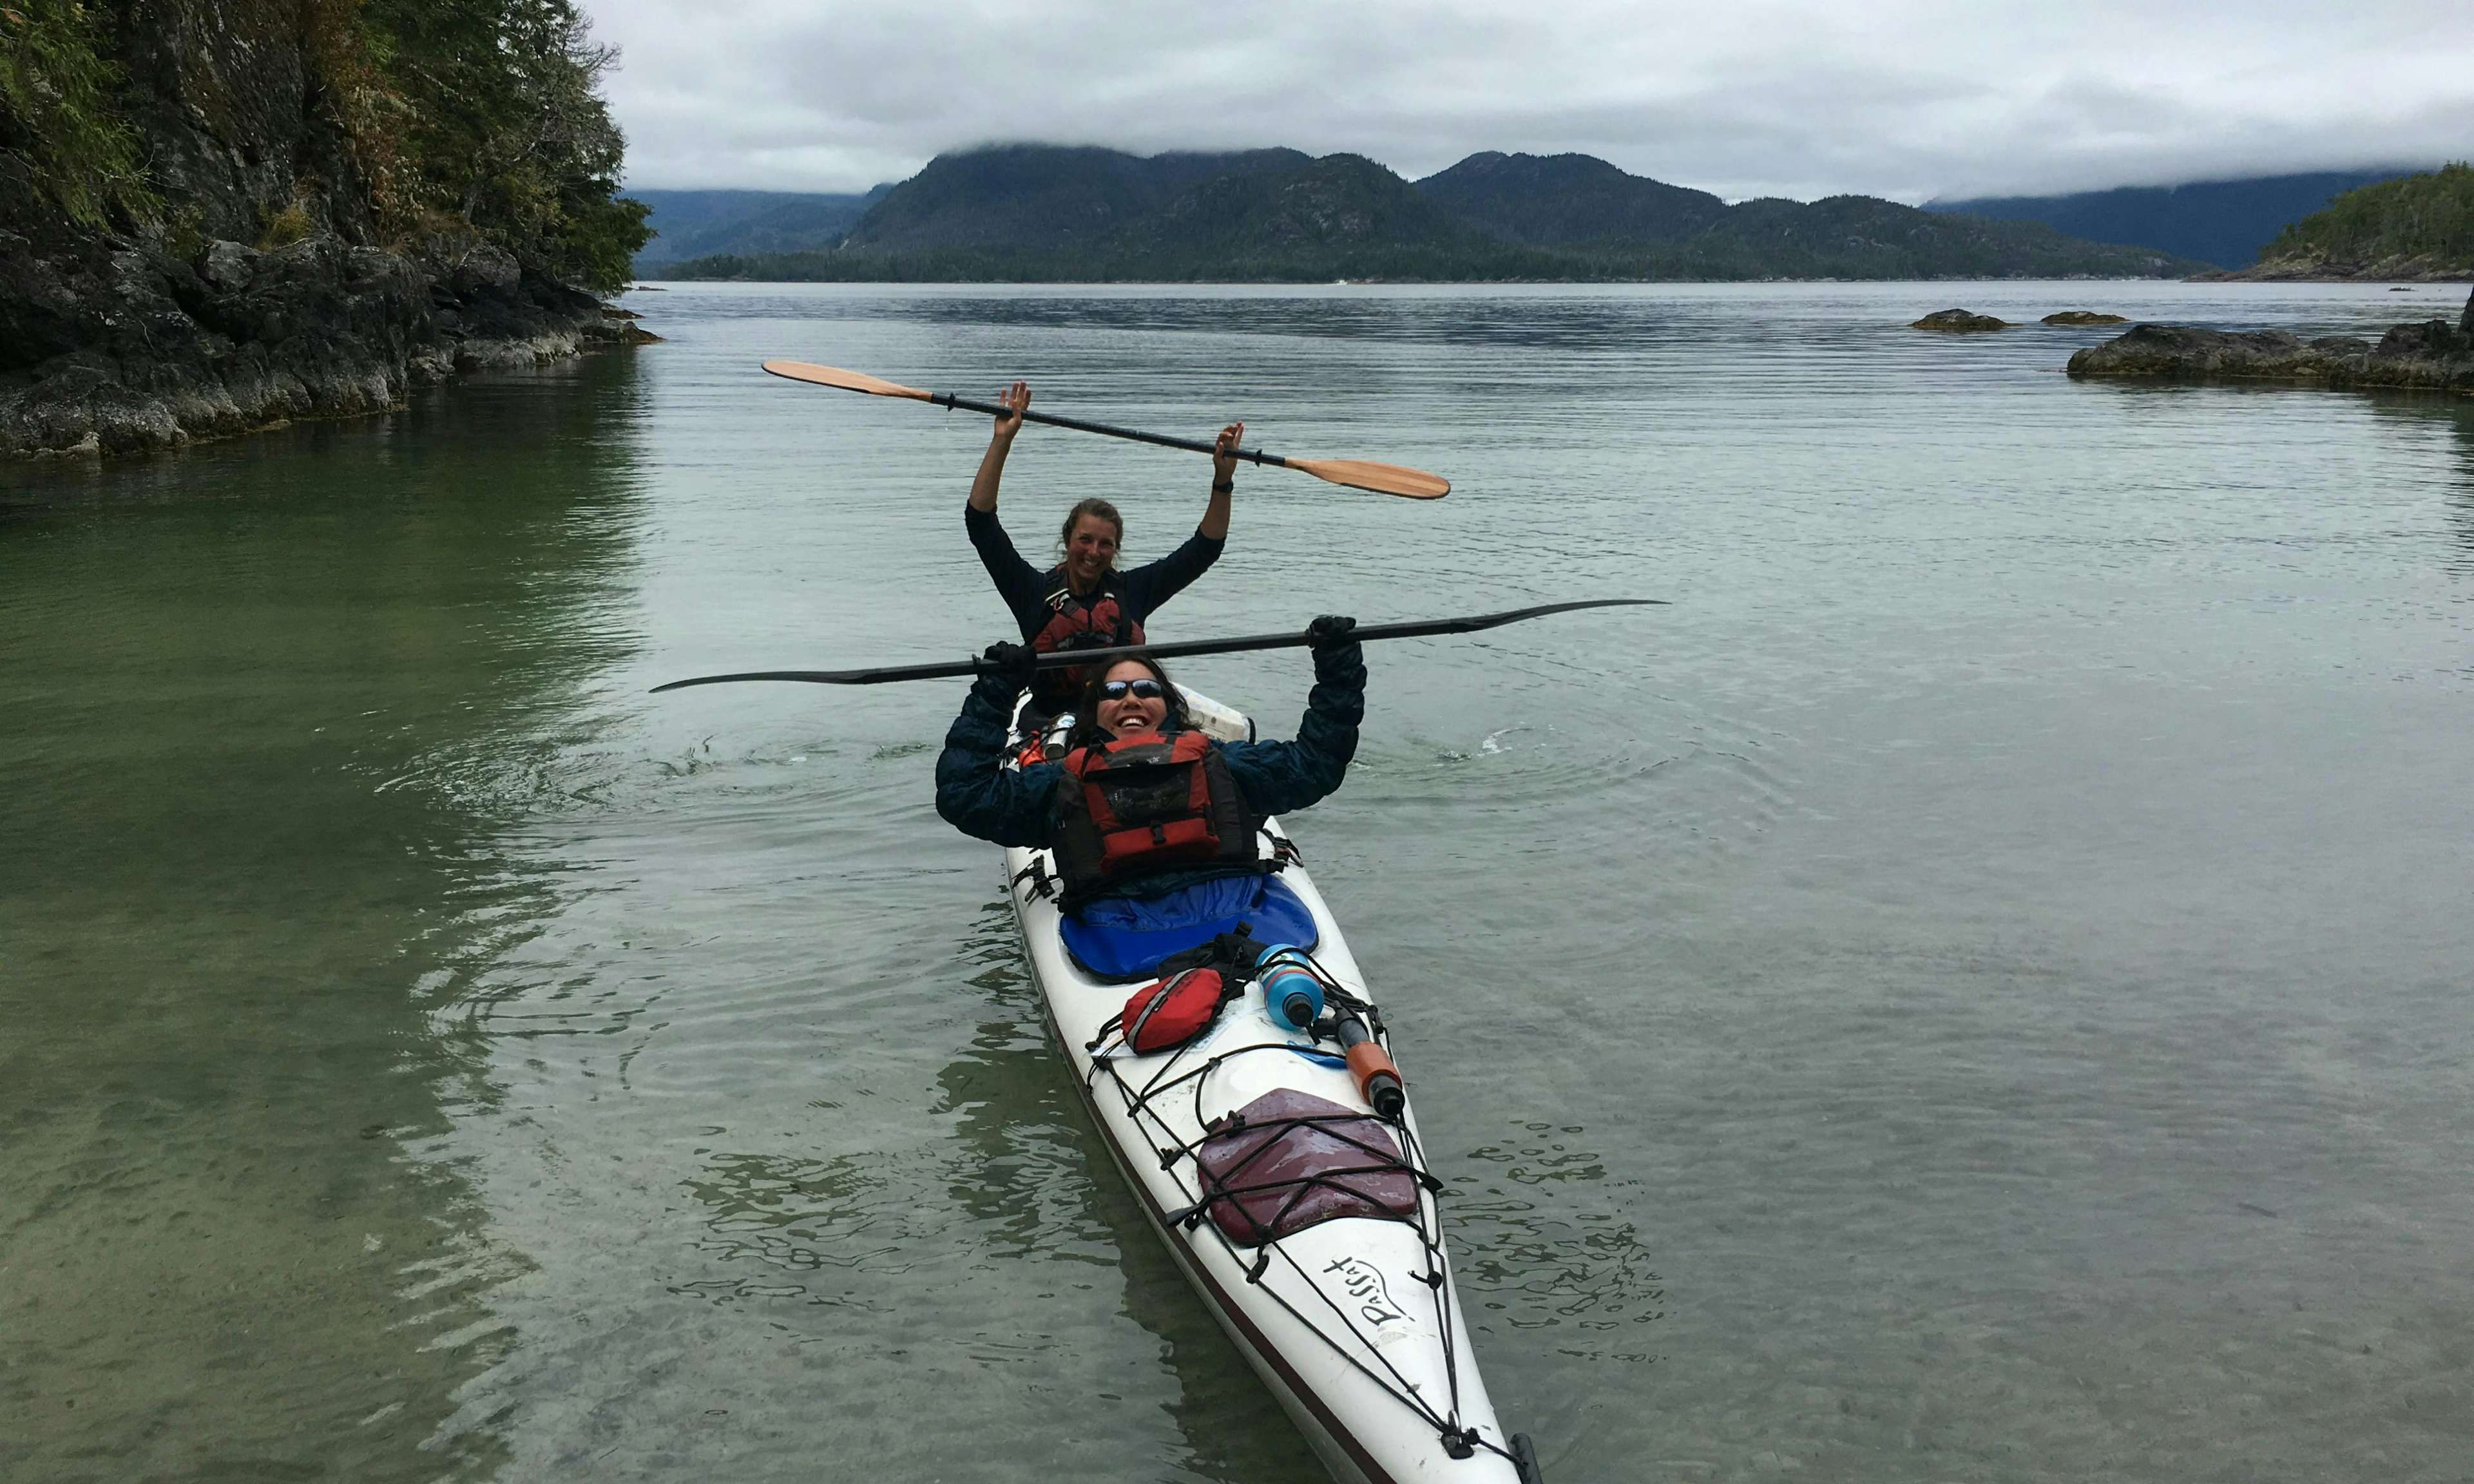 Karen Lai in double kayak with a friend